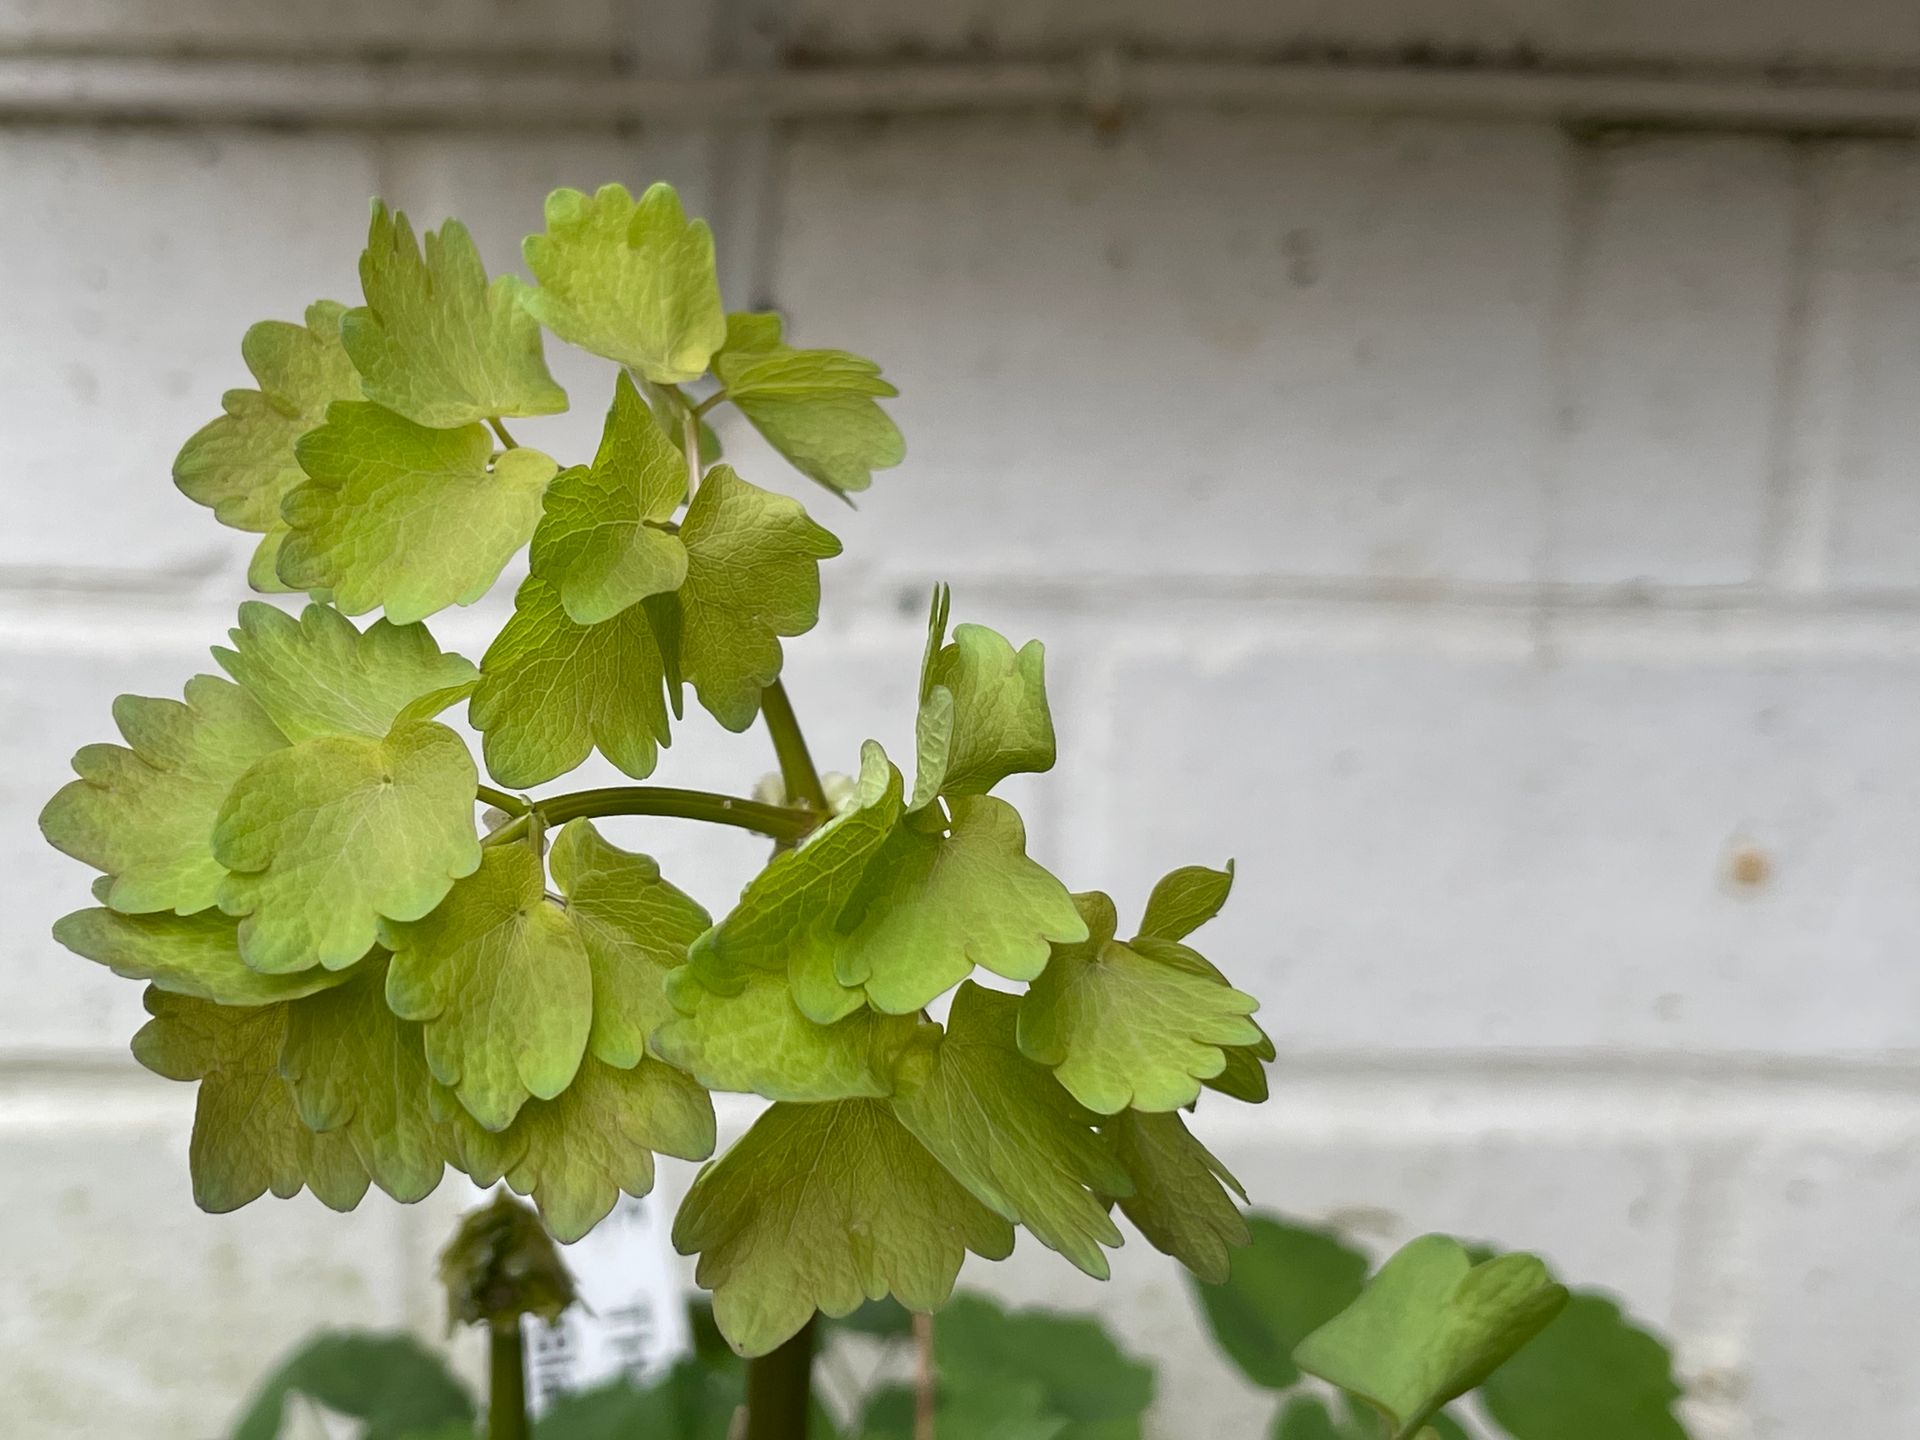 Thalictrum plant showing its leaves against a white-painted brick wall